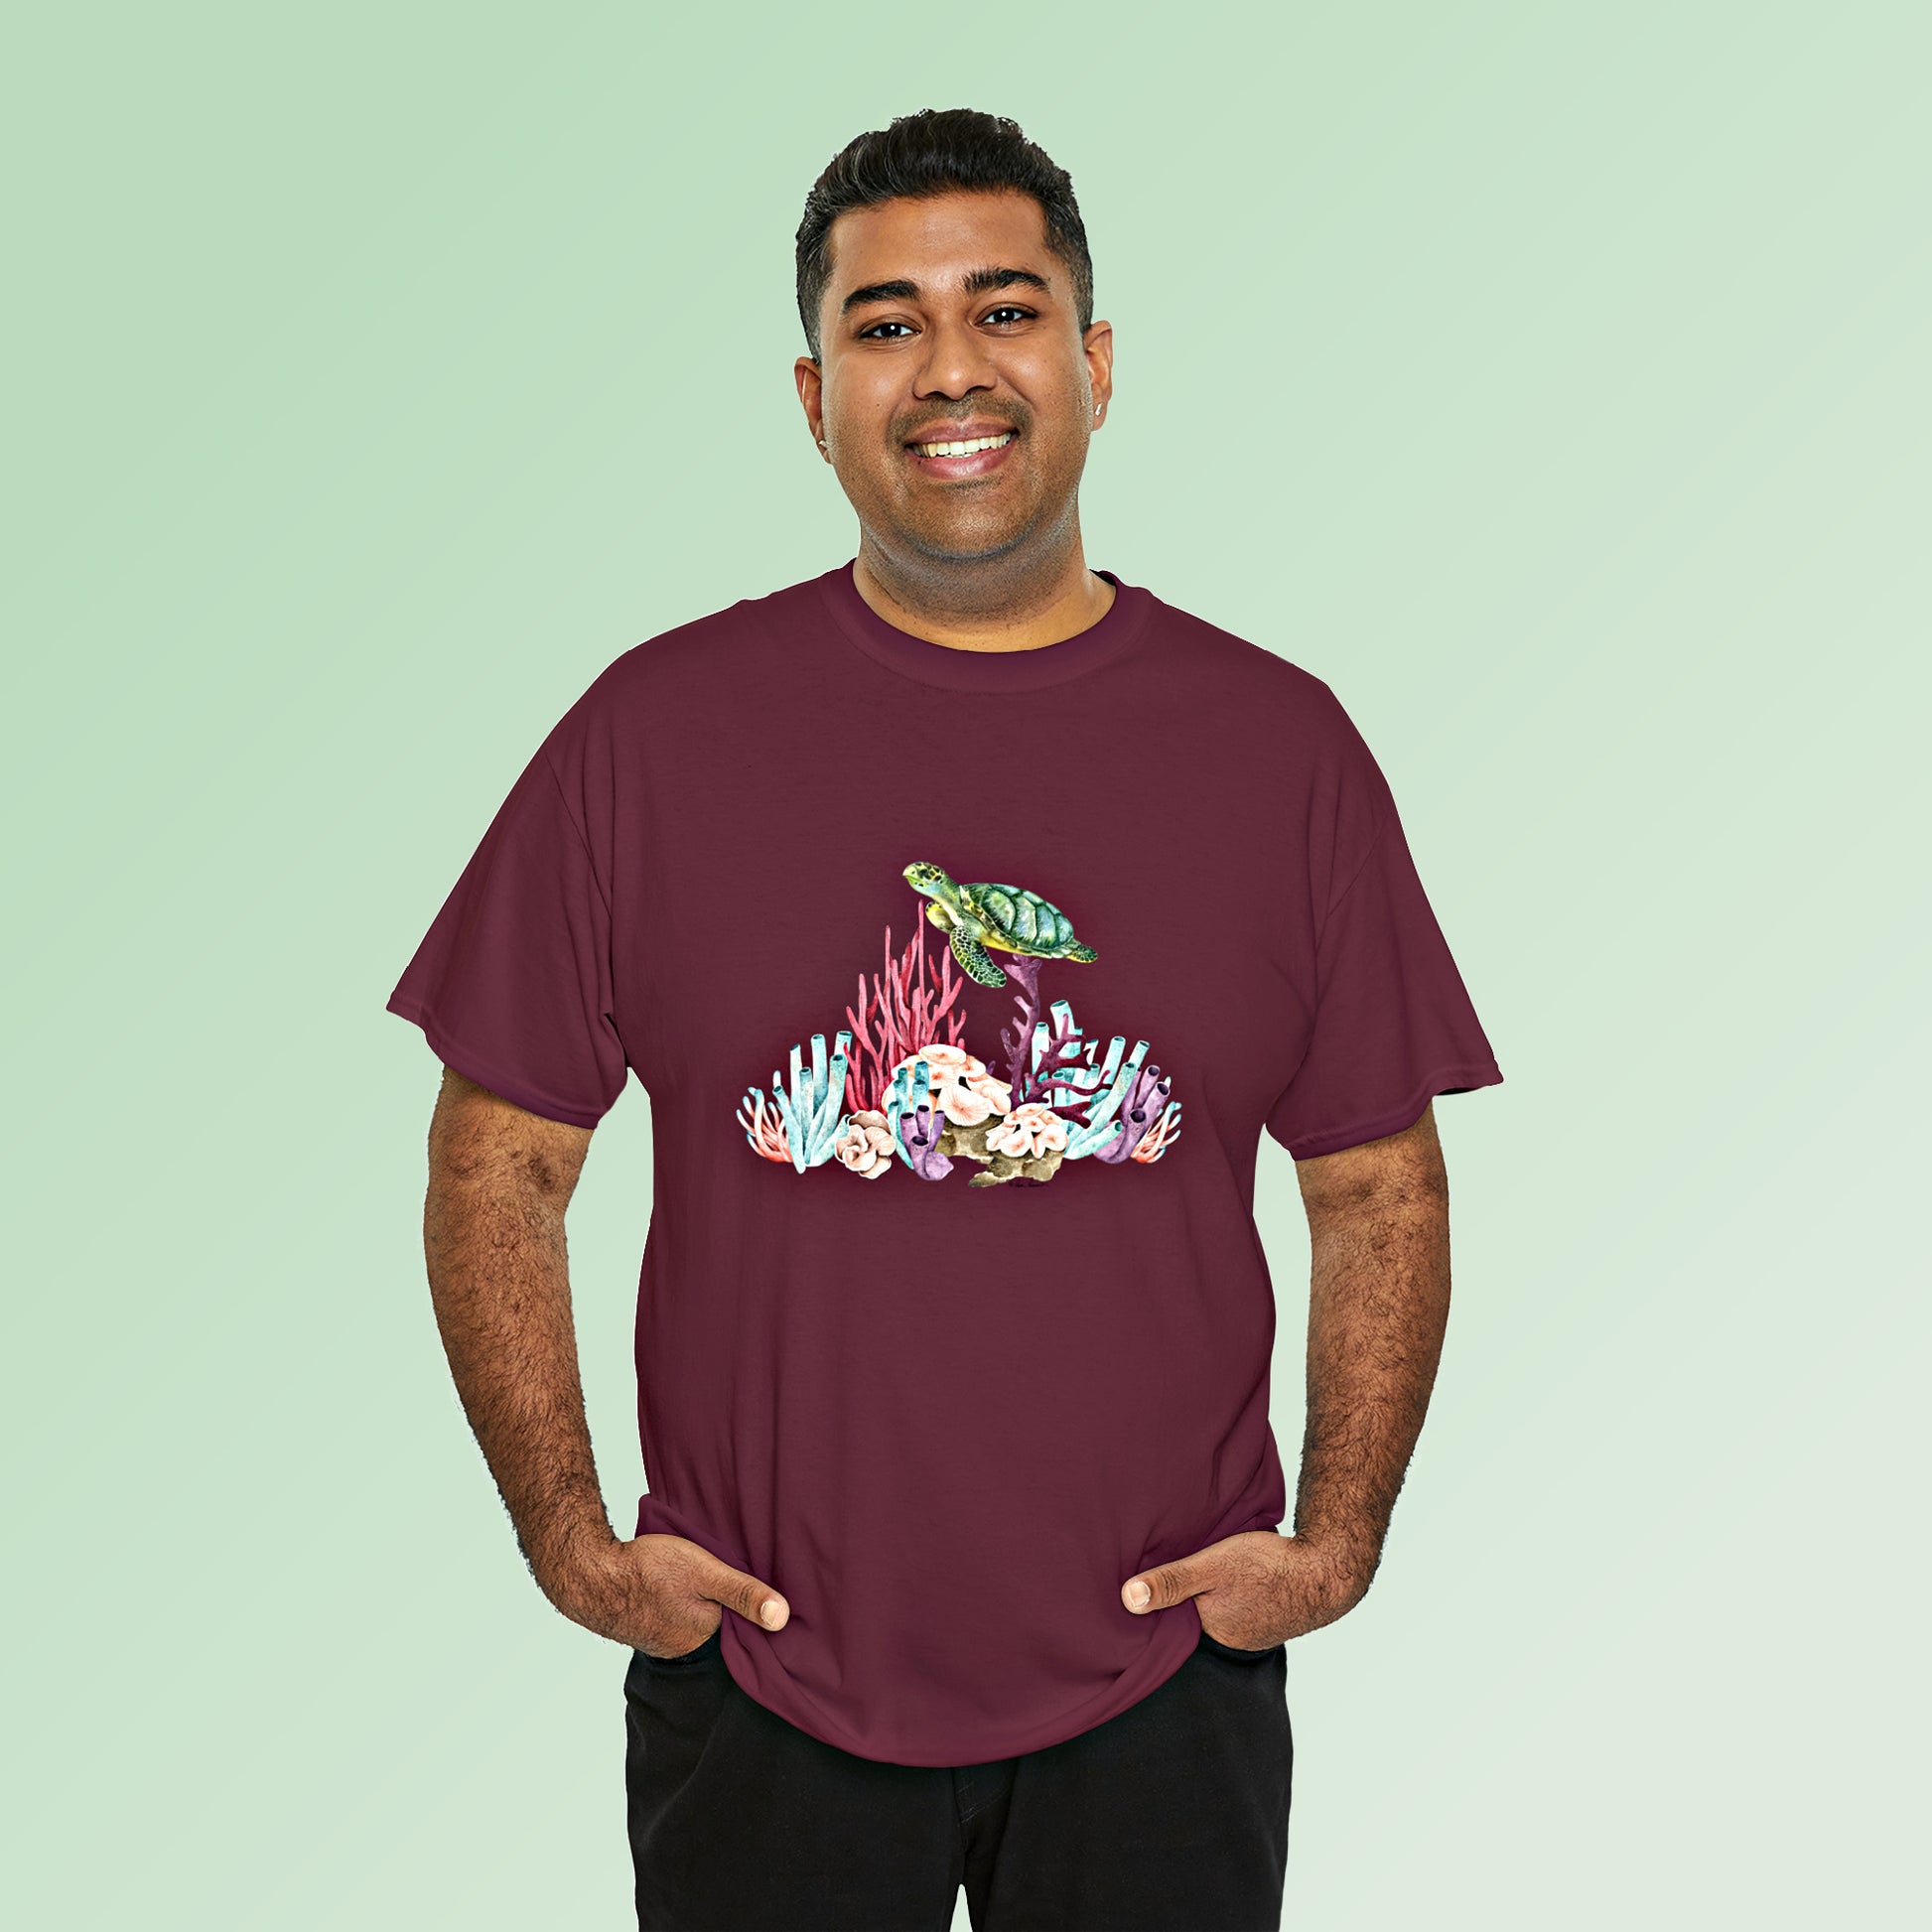 Mock up of a large man wearing the Maroon shirt